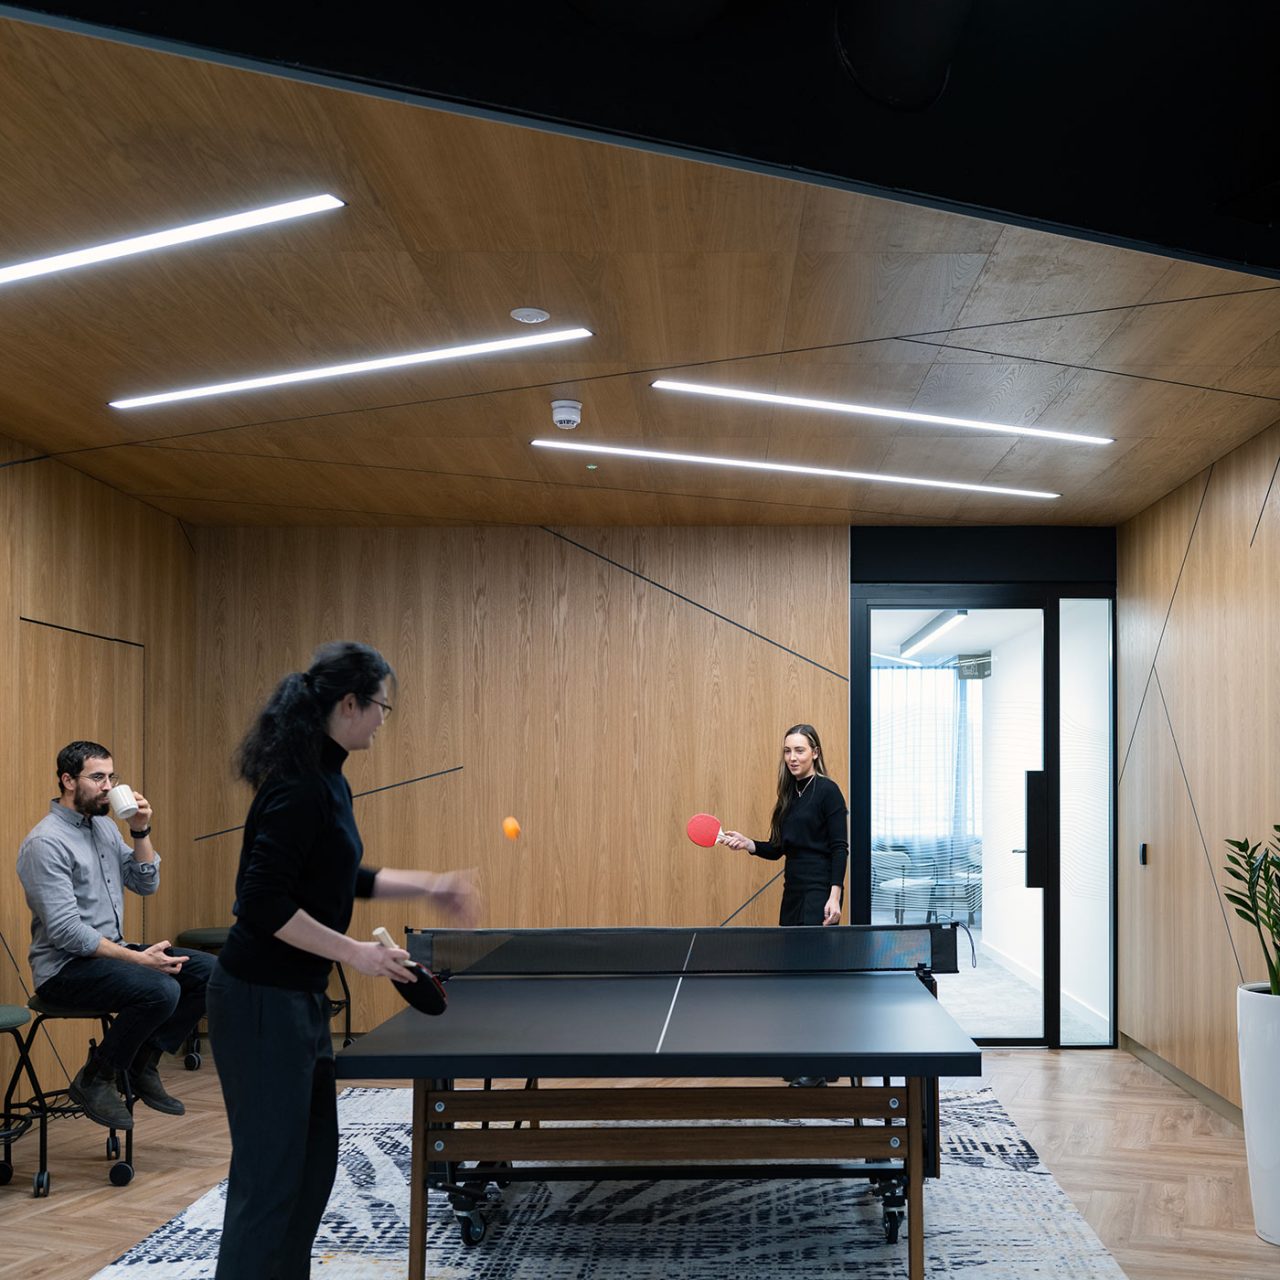 Two women playing ping pong on a black table